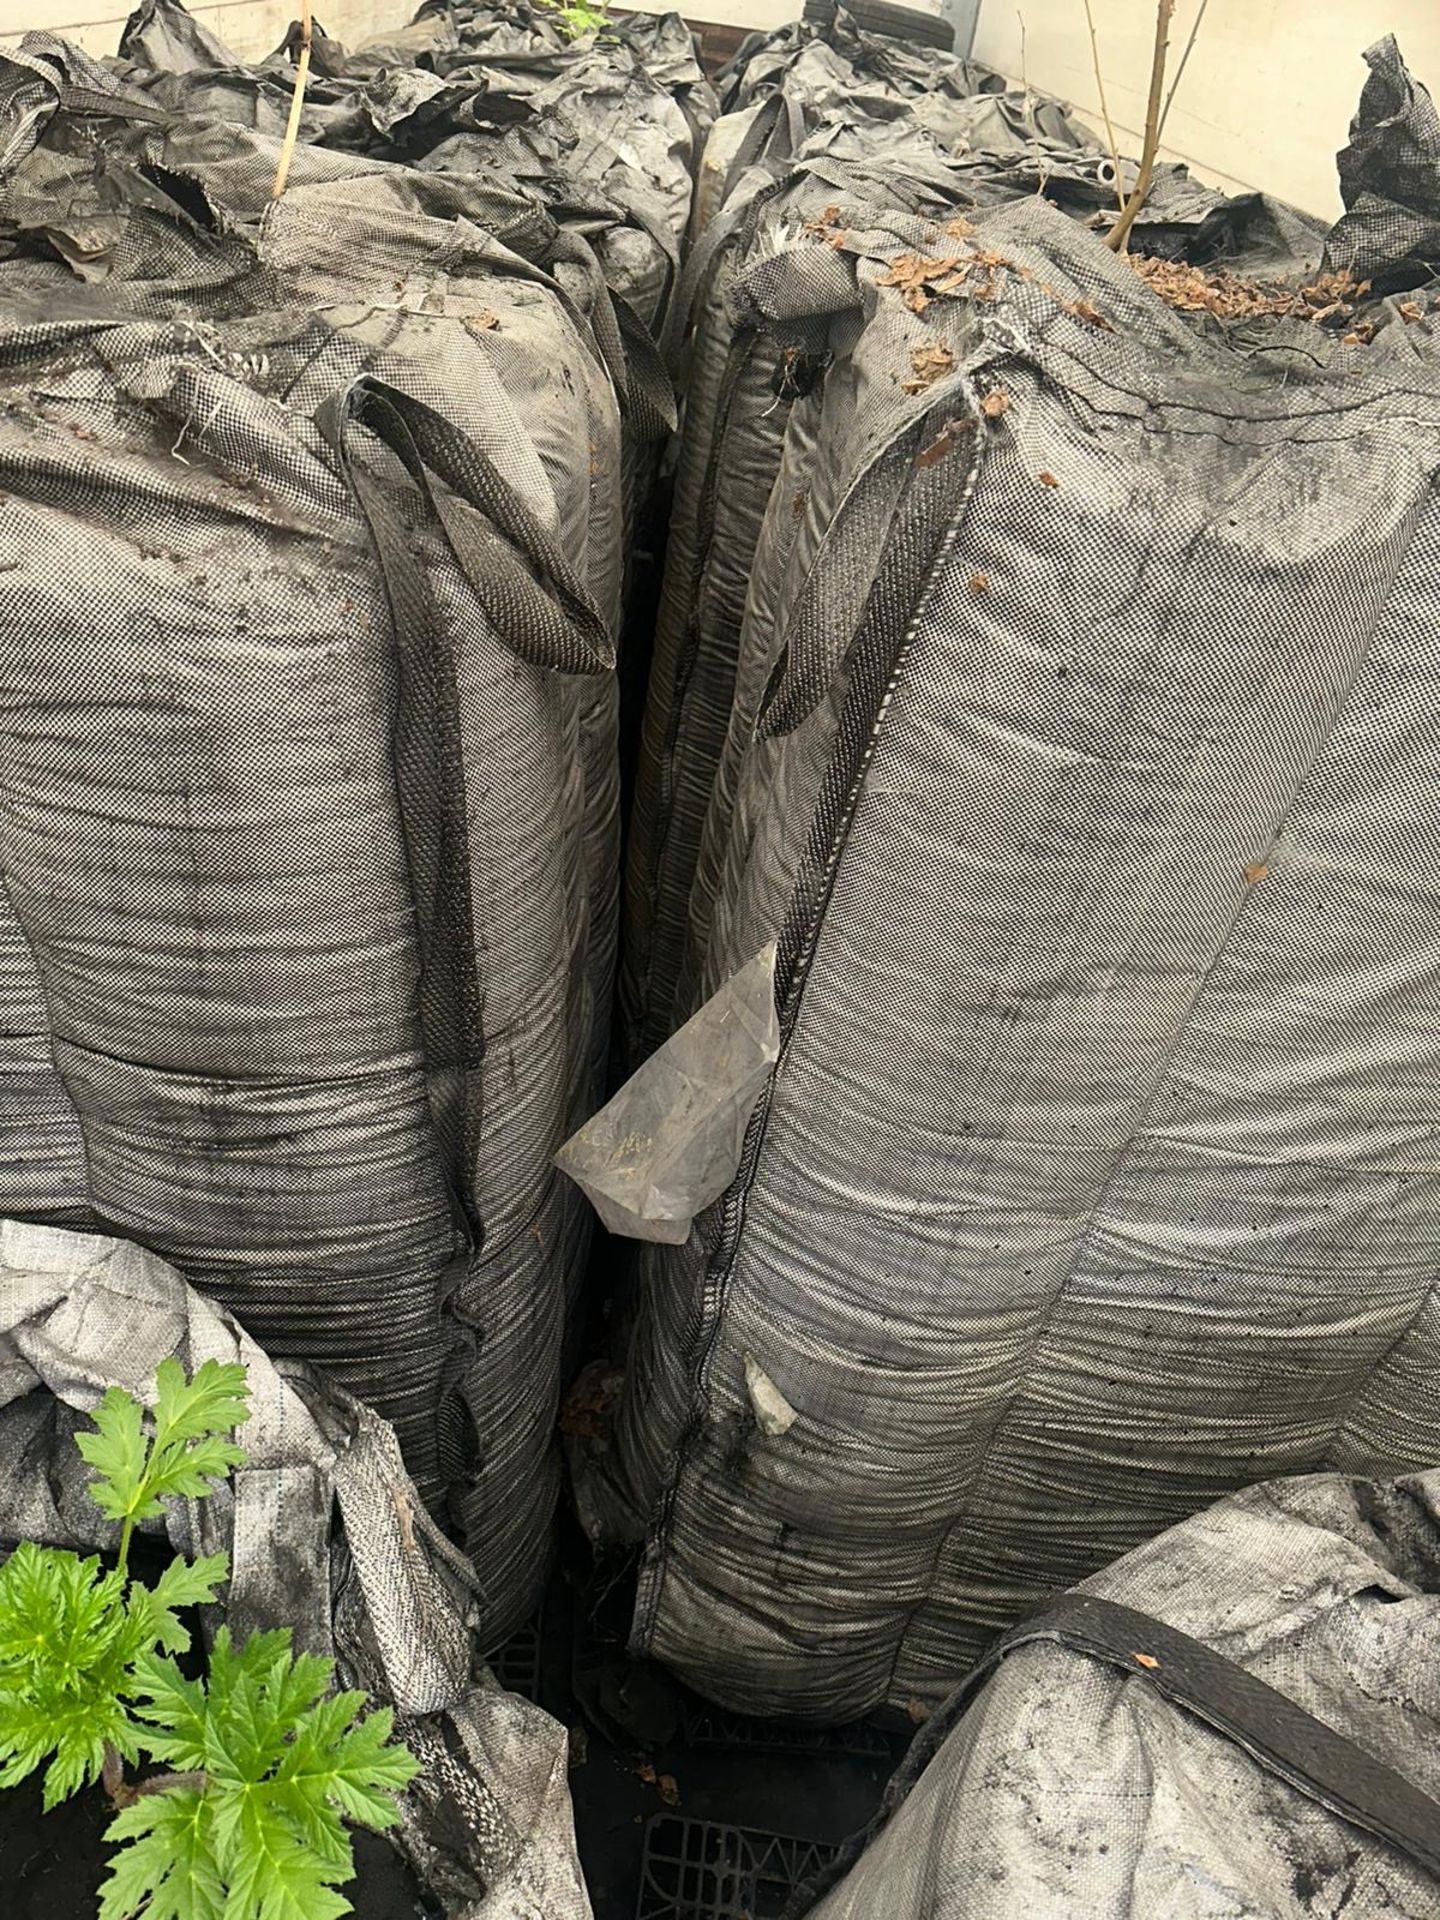 CARBON BLACK RAW MATERIAL BULK BAGS APPROX 14 TONNES - Image 3 of 8